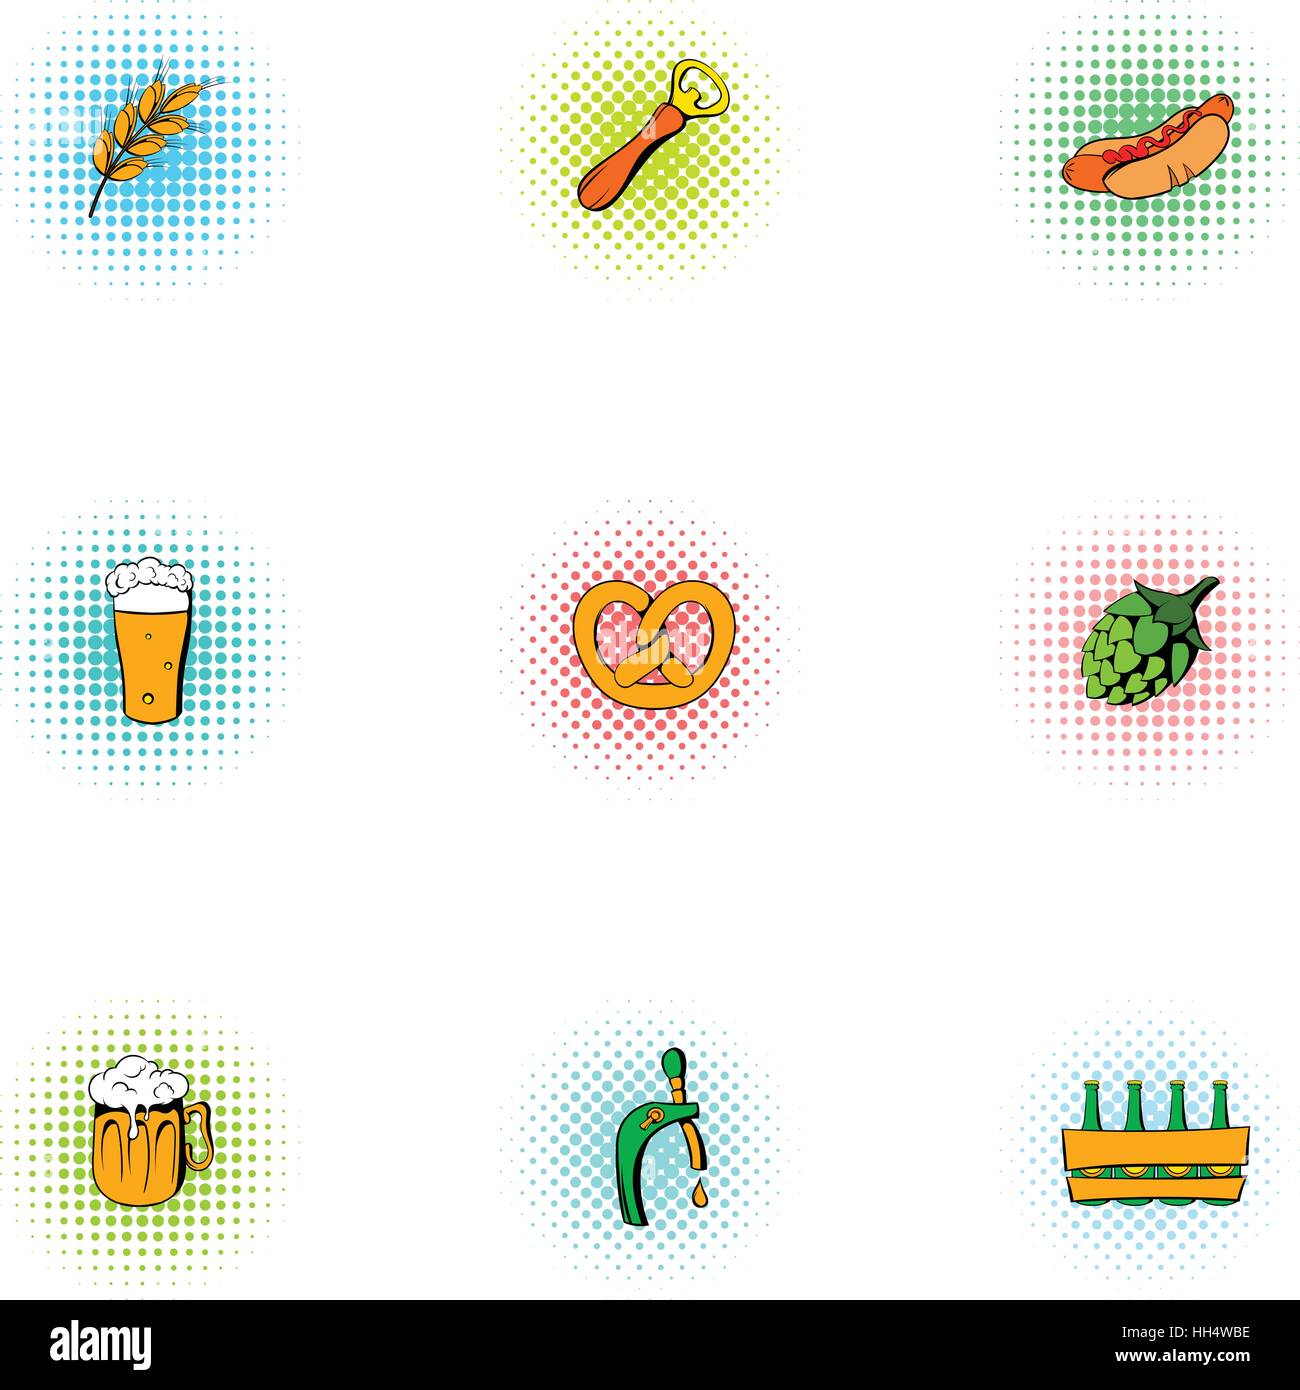 Alcohol icons set, pop-art style Stock Vector